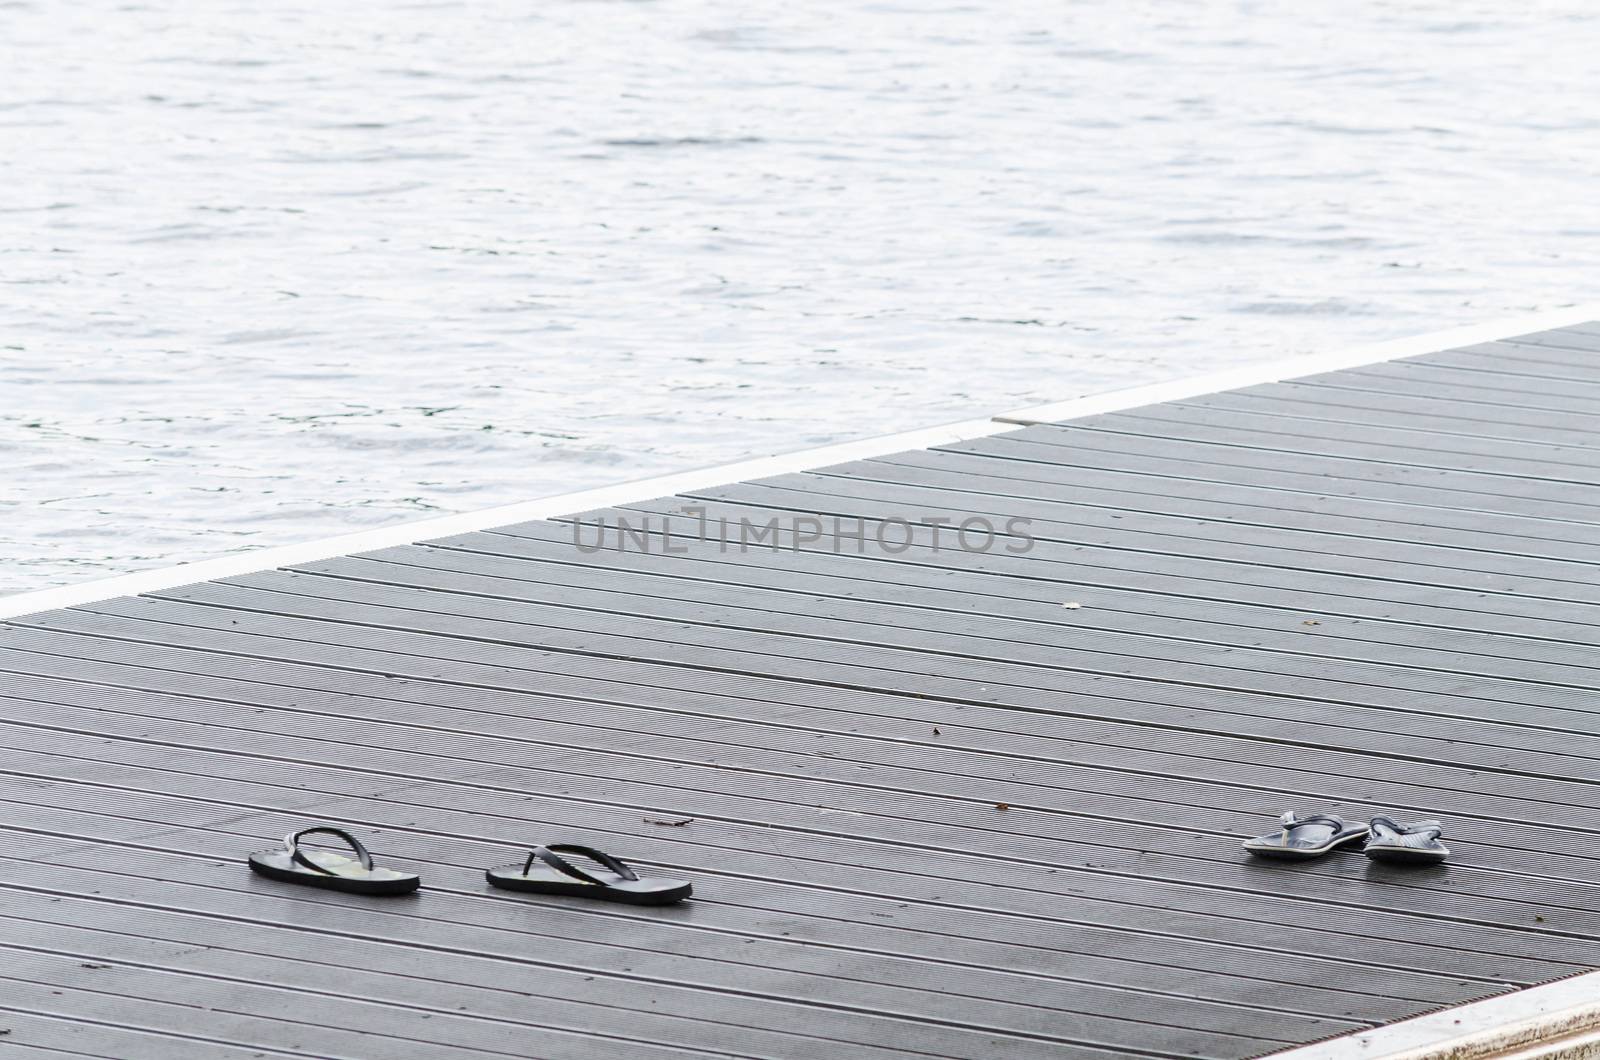 Black sandals on a boat dock on a promenade along the lake.